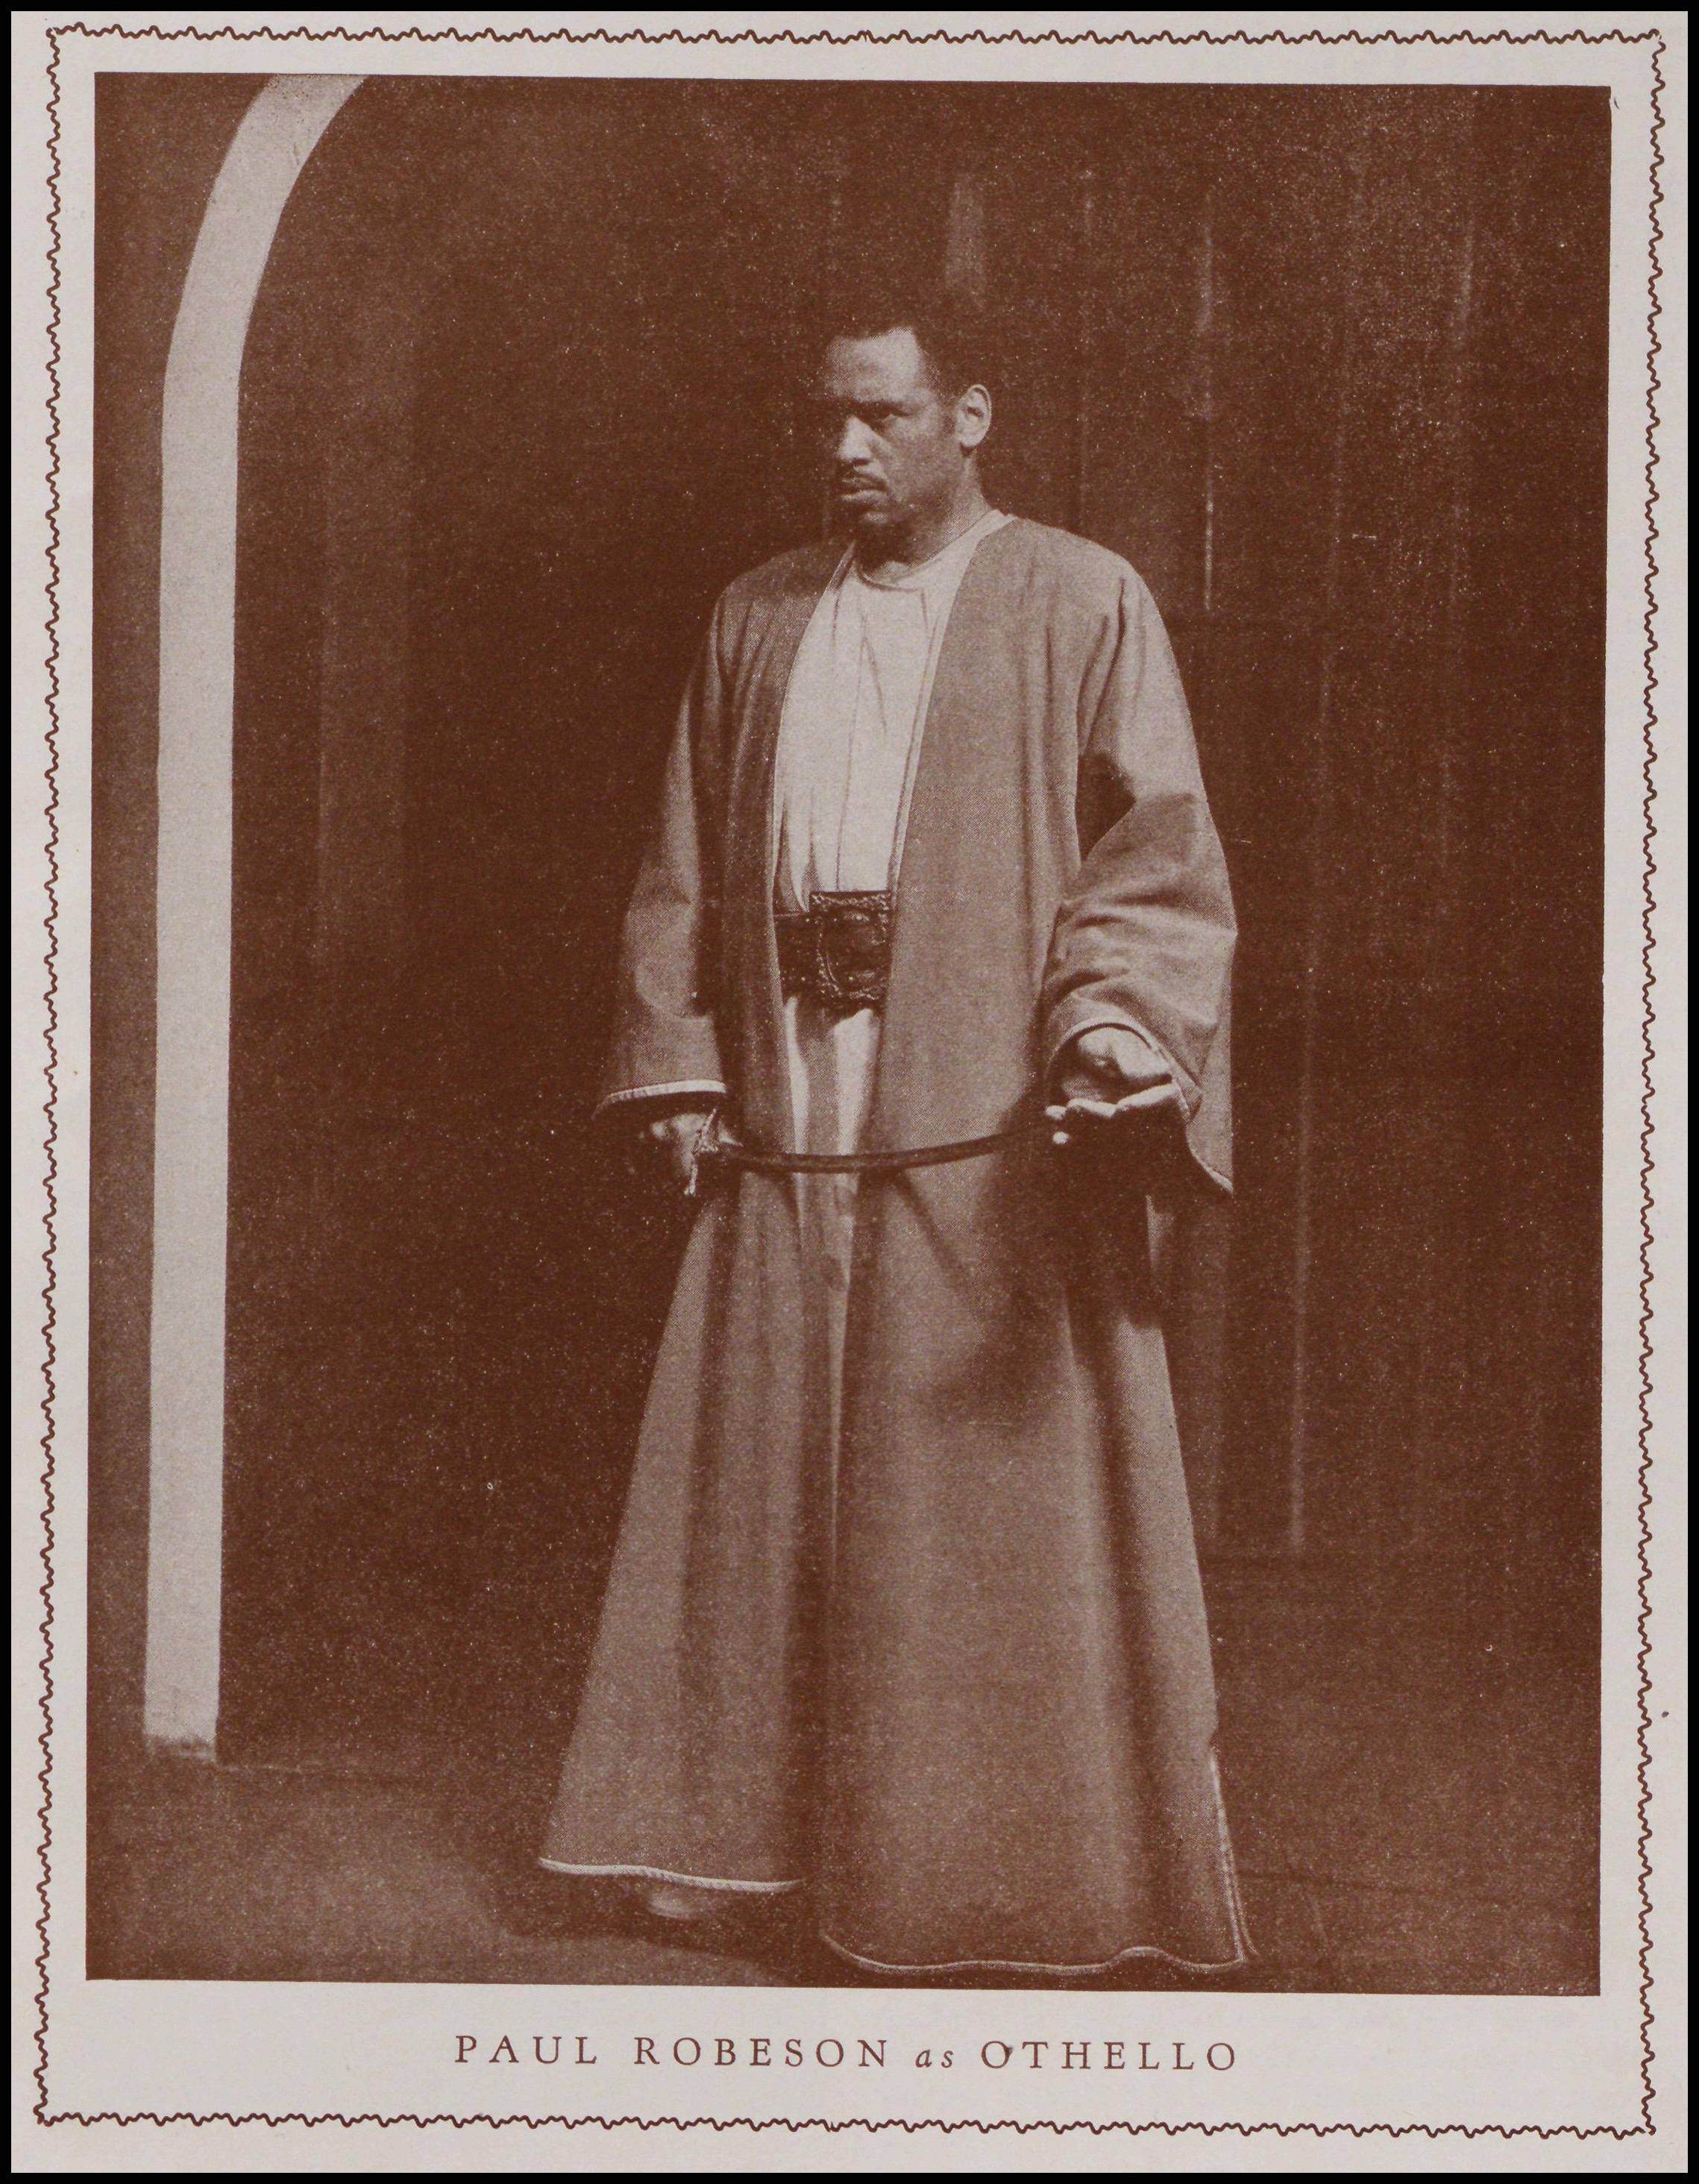 Paul Robeson as Othello, the Moor of Venice